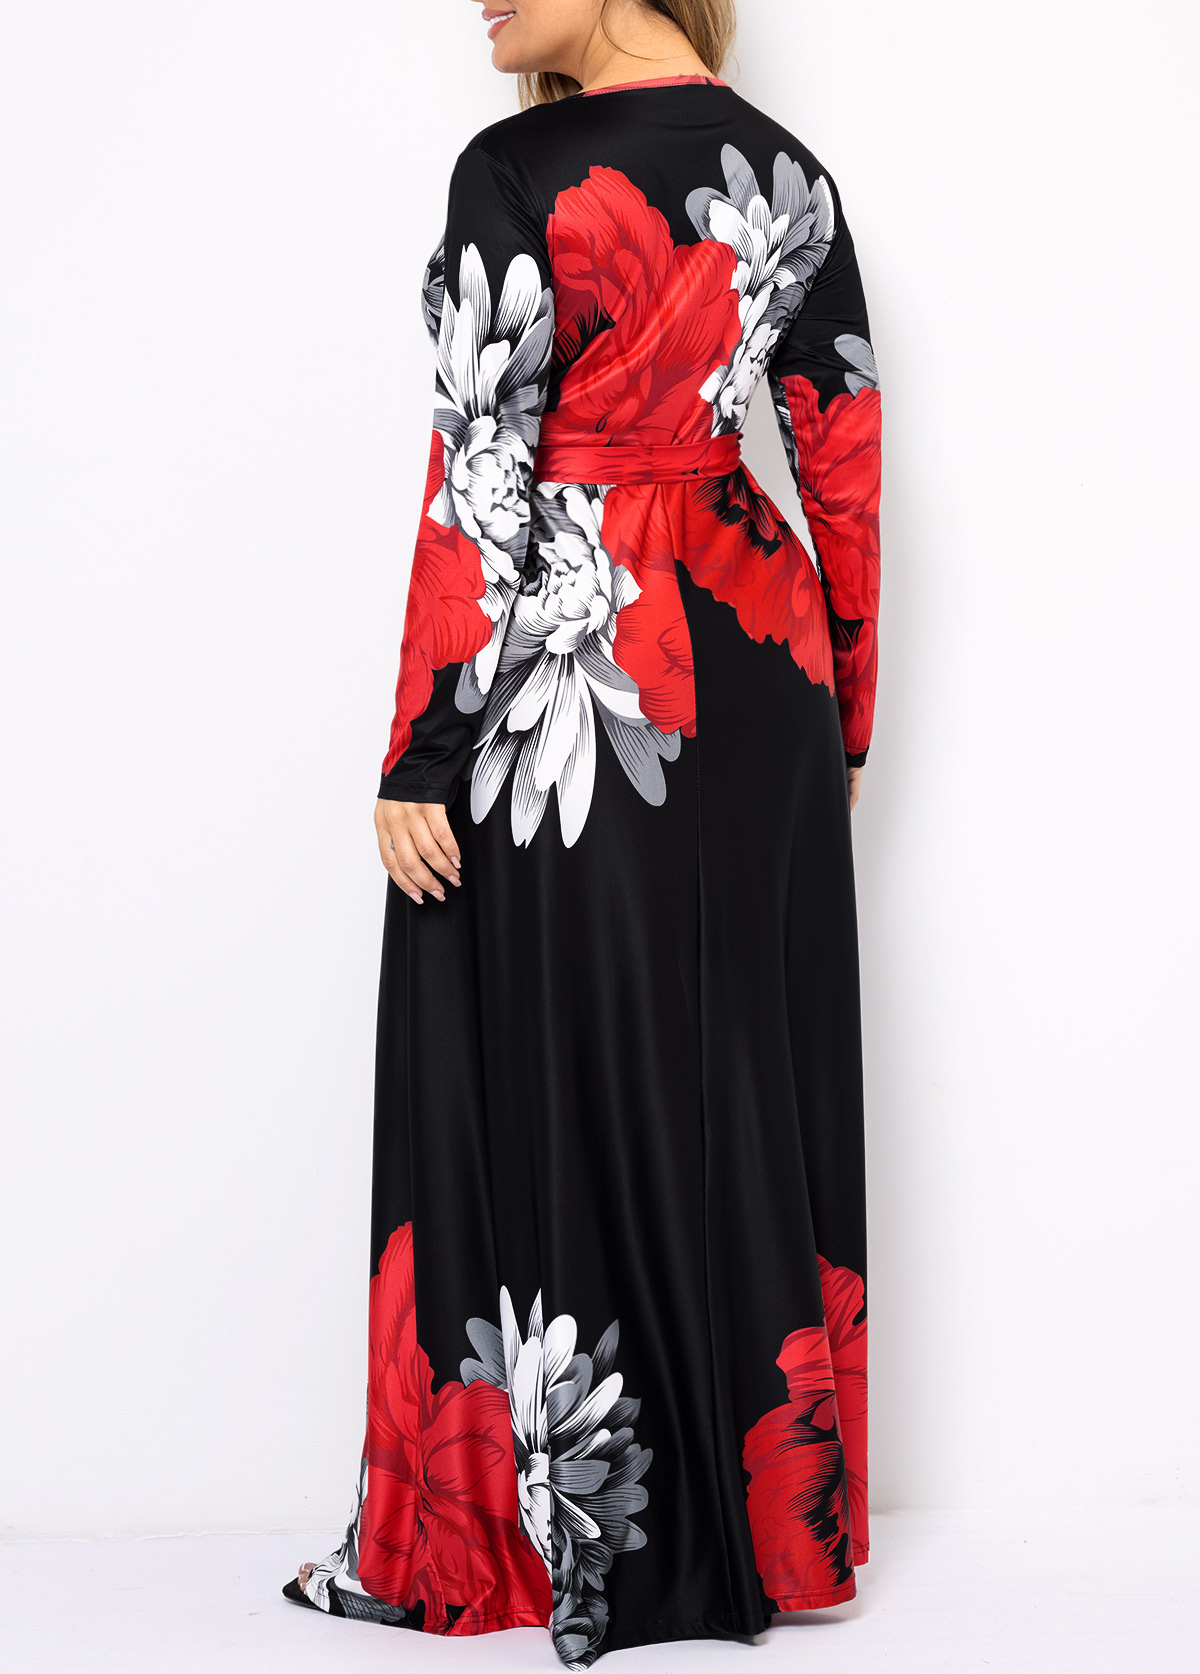 Floral Print Plus Size Belted Long Sleeve Dress